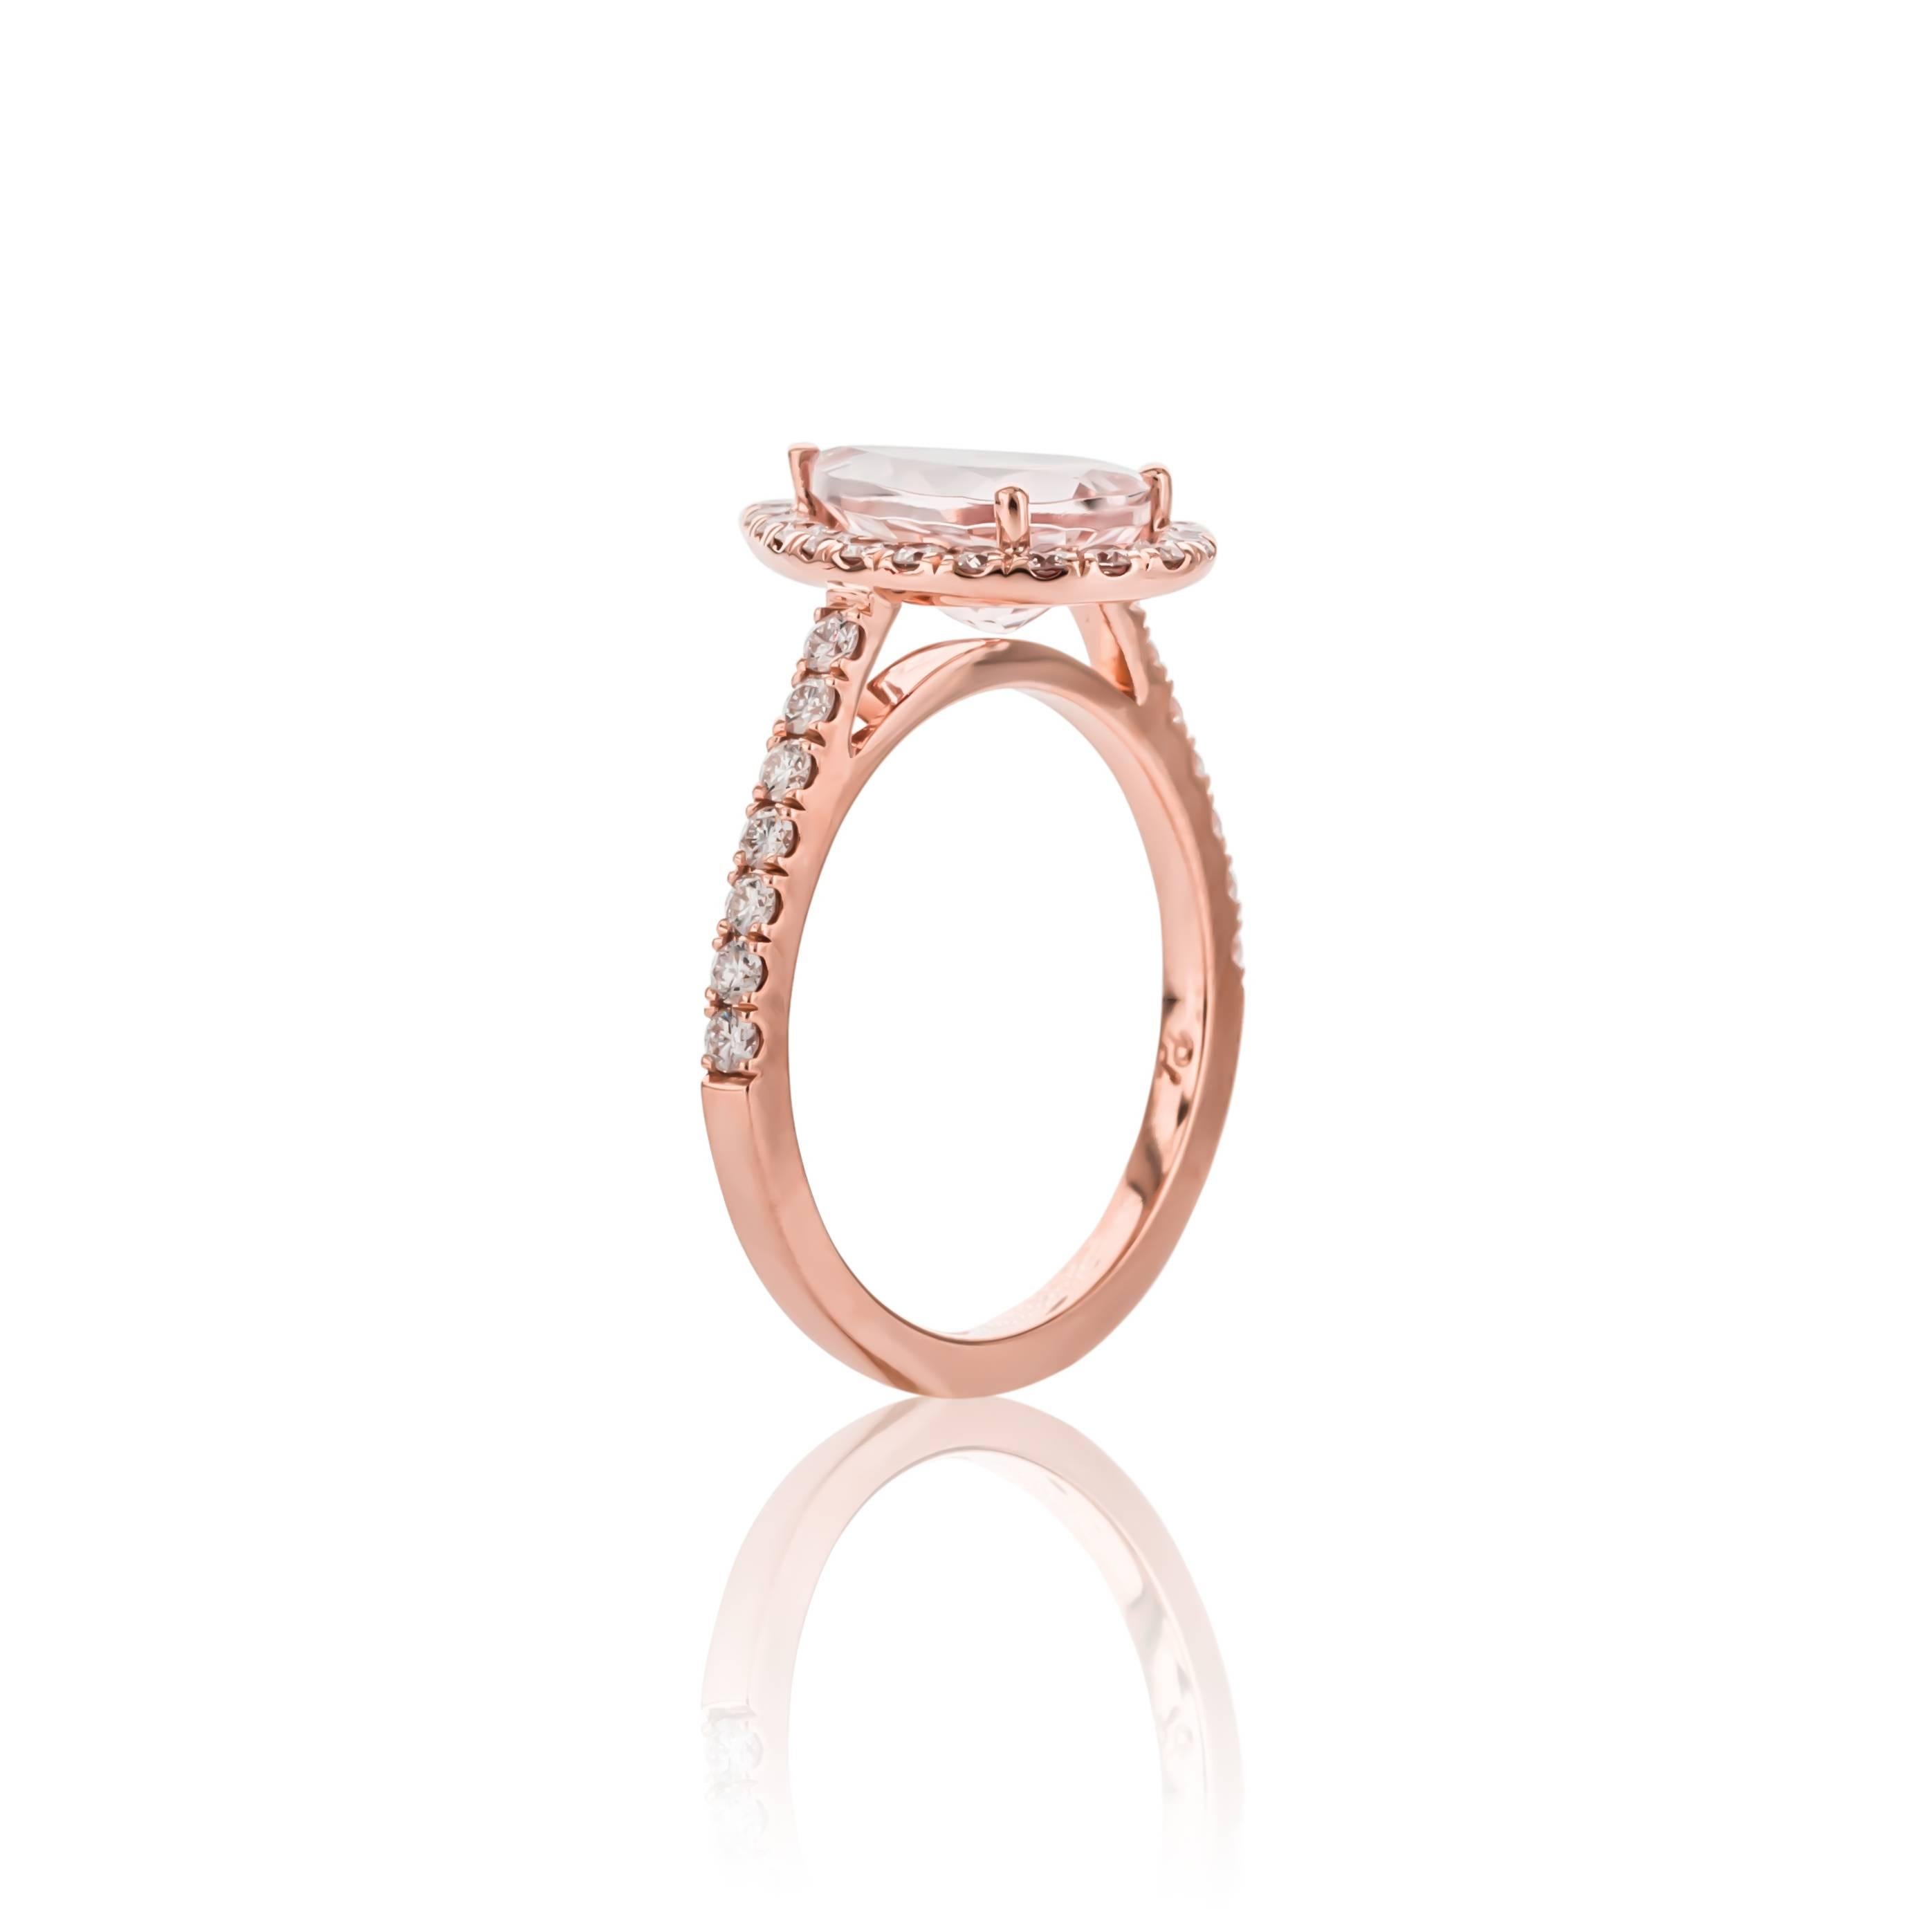 One of kind 18K rose gold morganite and diamond ring. Set with one pear shape morganite weighing 1.95 carats of fine color and clarity, surrounded by round brilliant cut diamonds weighing .57 carats total weight, G color and VS clarity. 